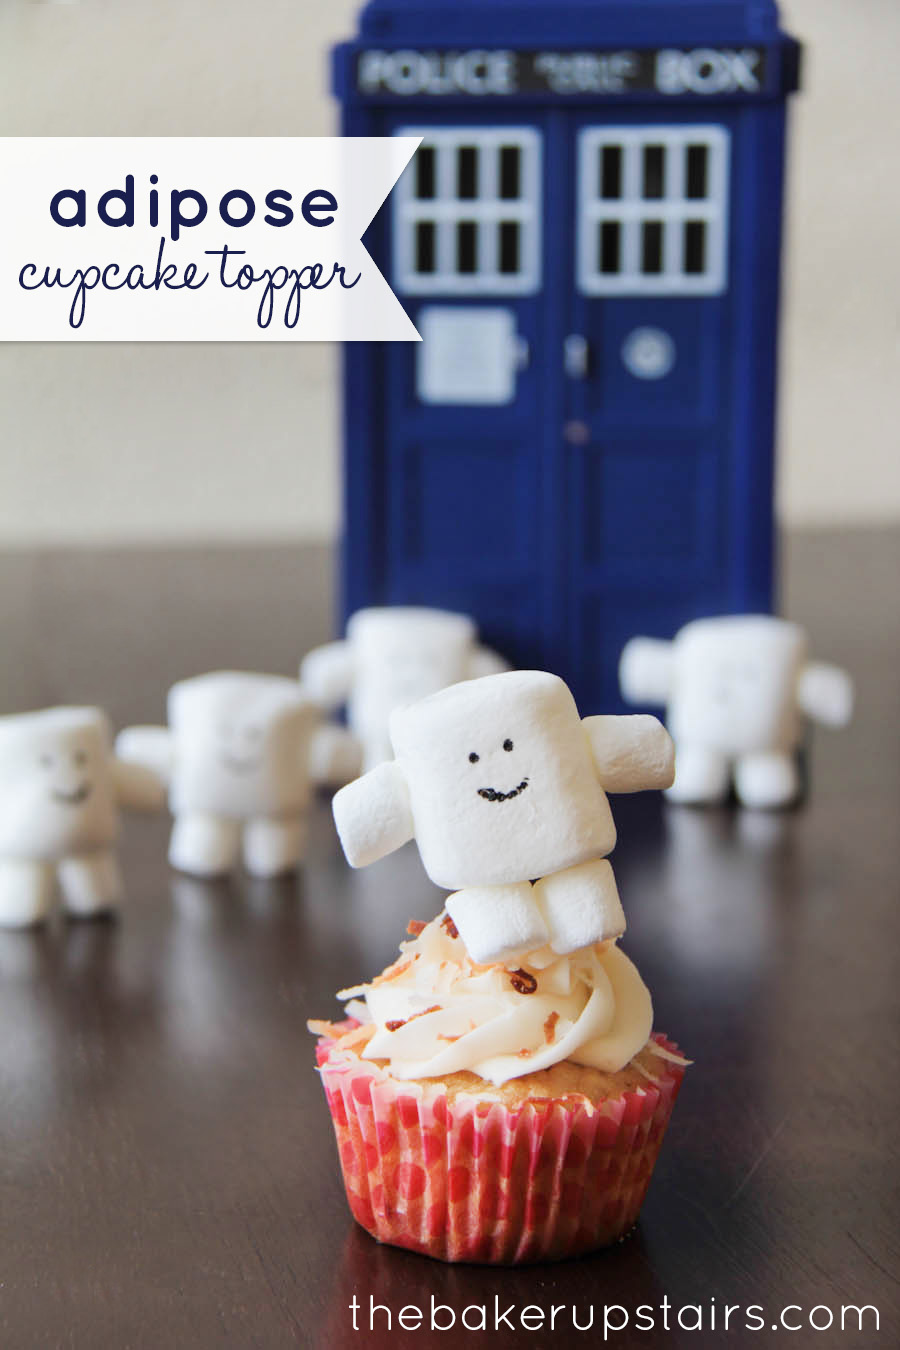 Adipose are made out of our fat. How do we create fat? Cupcakes!